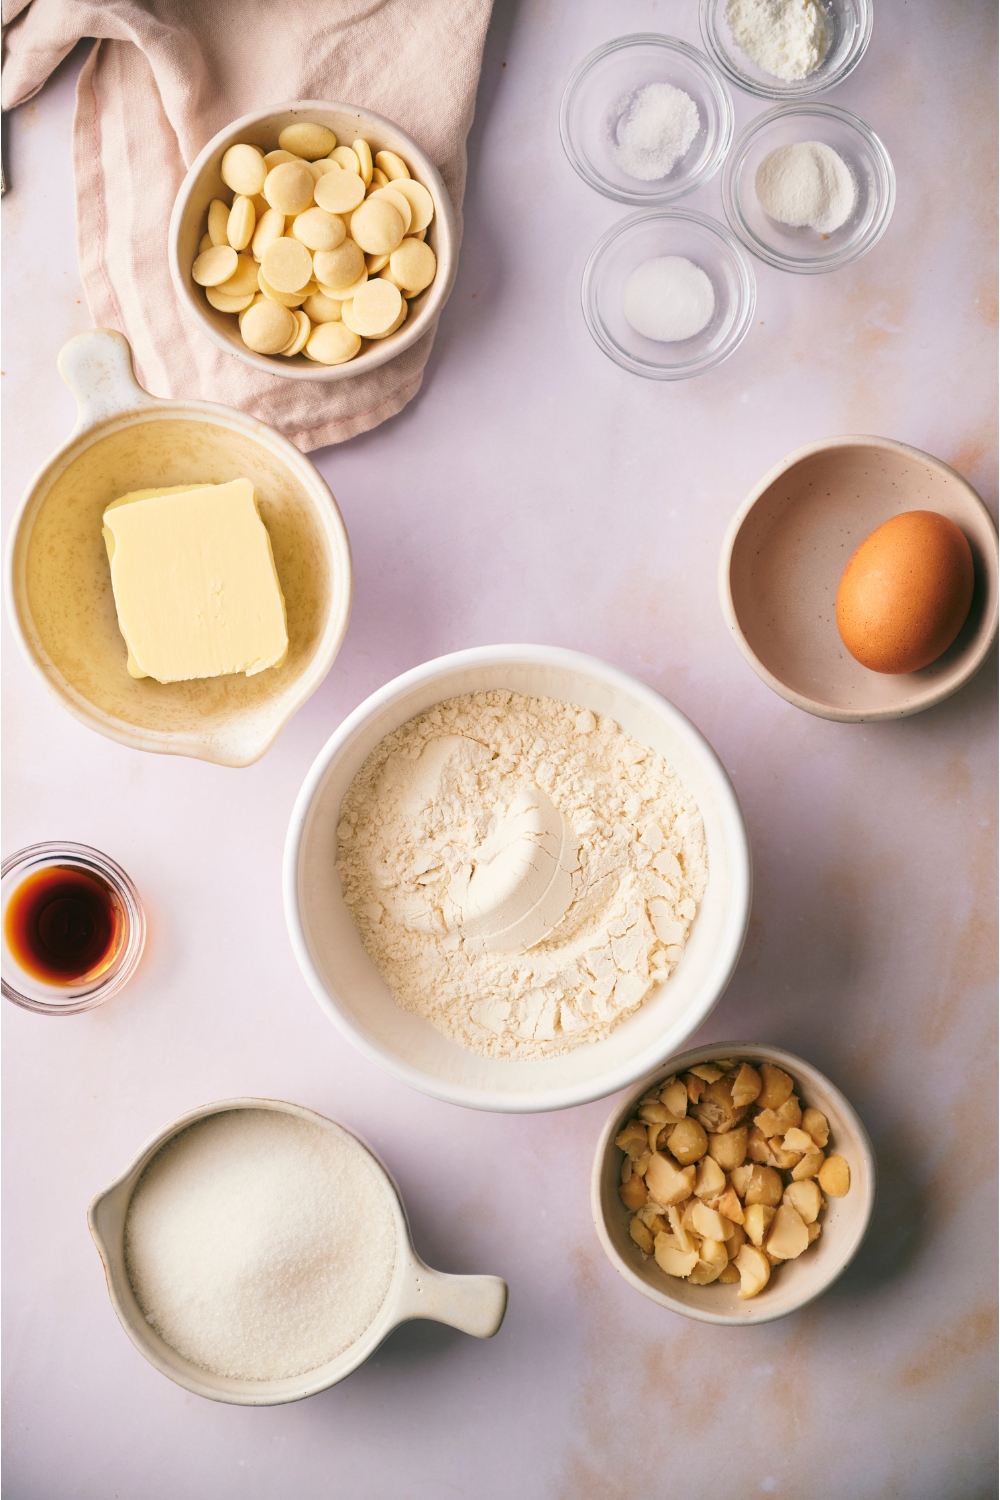 An assortment of ingredients including bowls of flour, white chocolate chips, an egg, vanilla extract, butter, and sugar.